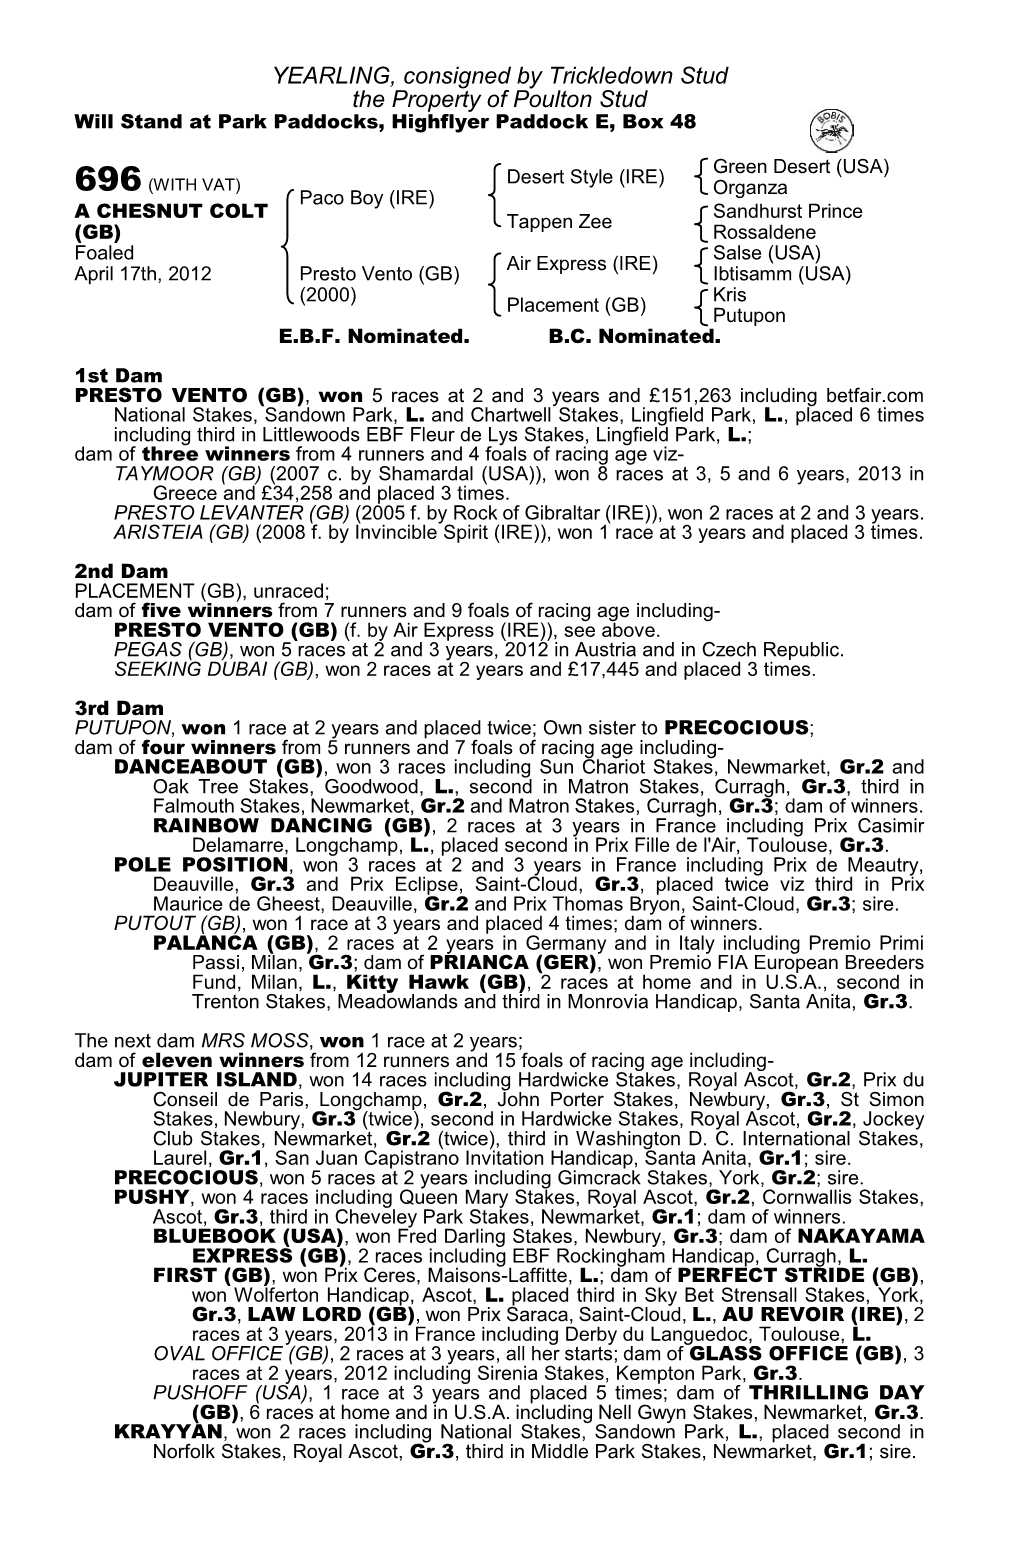 YEARLING, Consigned by Trickledown Stud the Property of Poulton Stud Will Stand at Park Paddocks, Highflyer Paddock E, Box 48